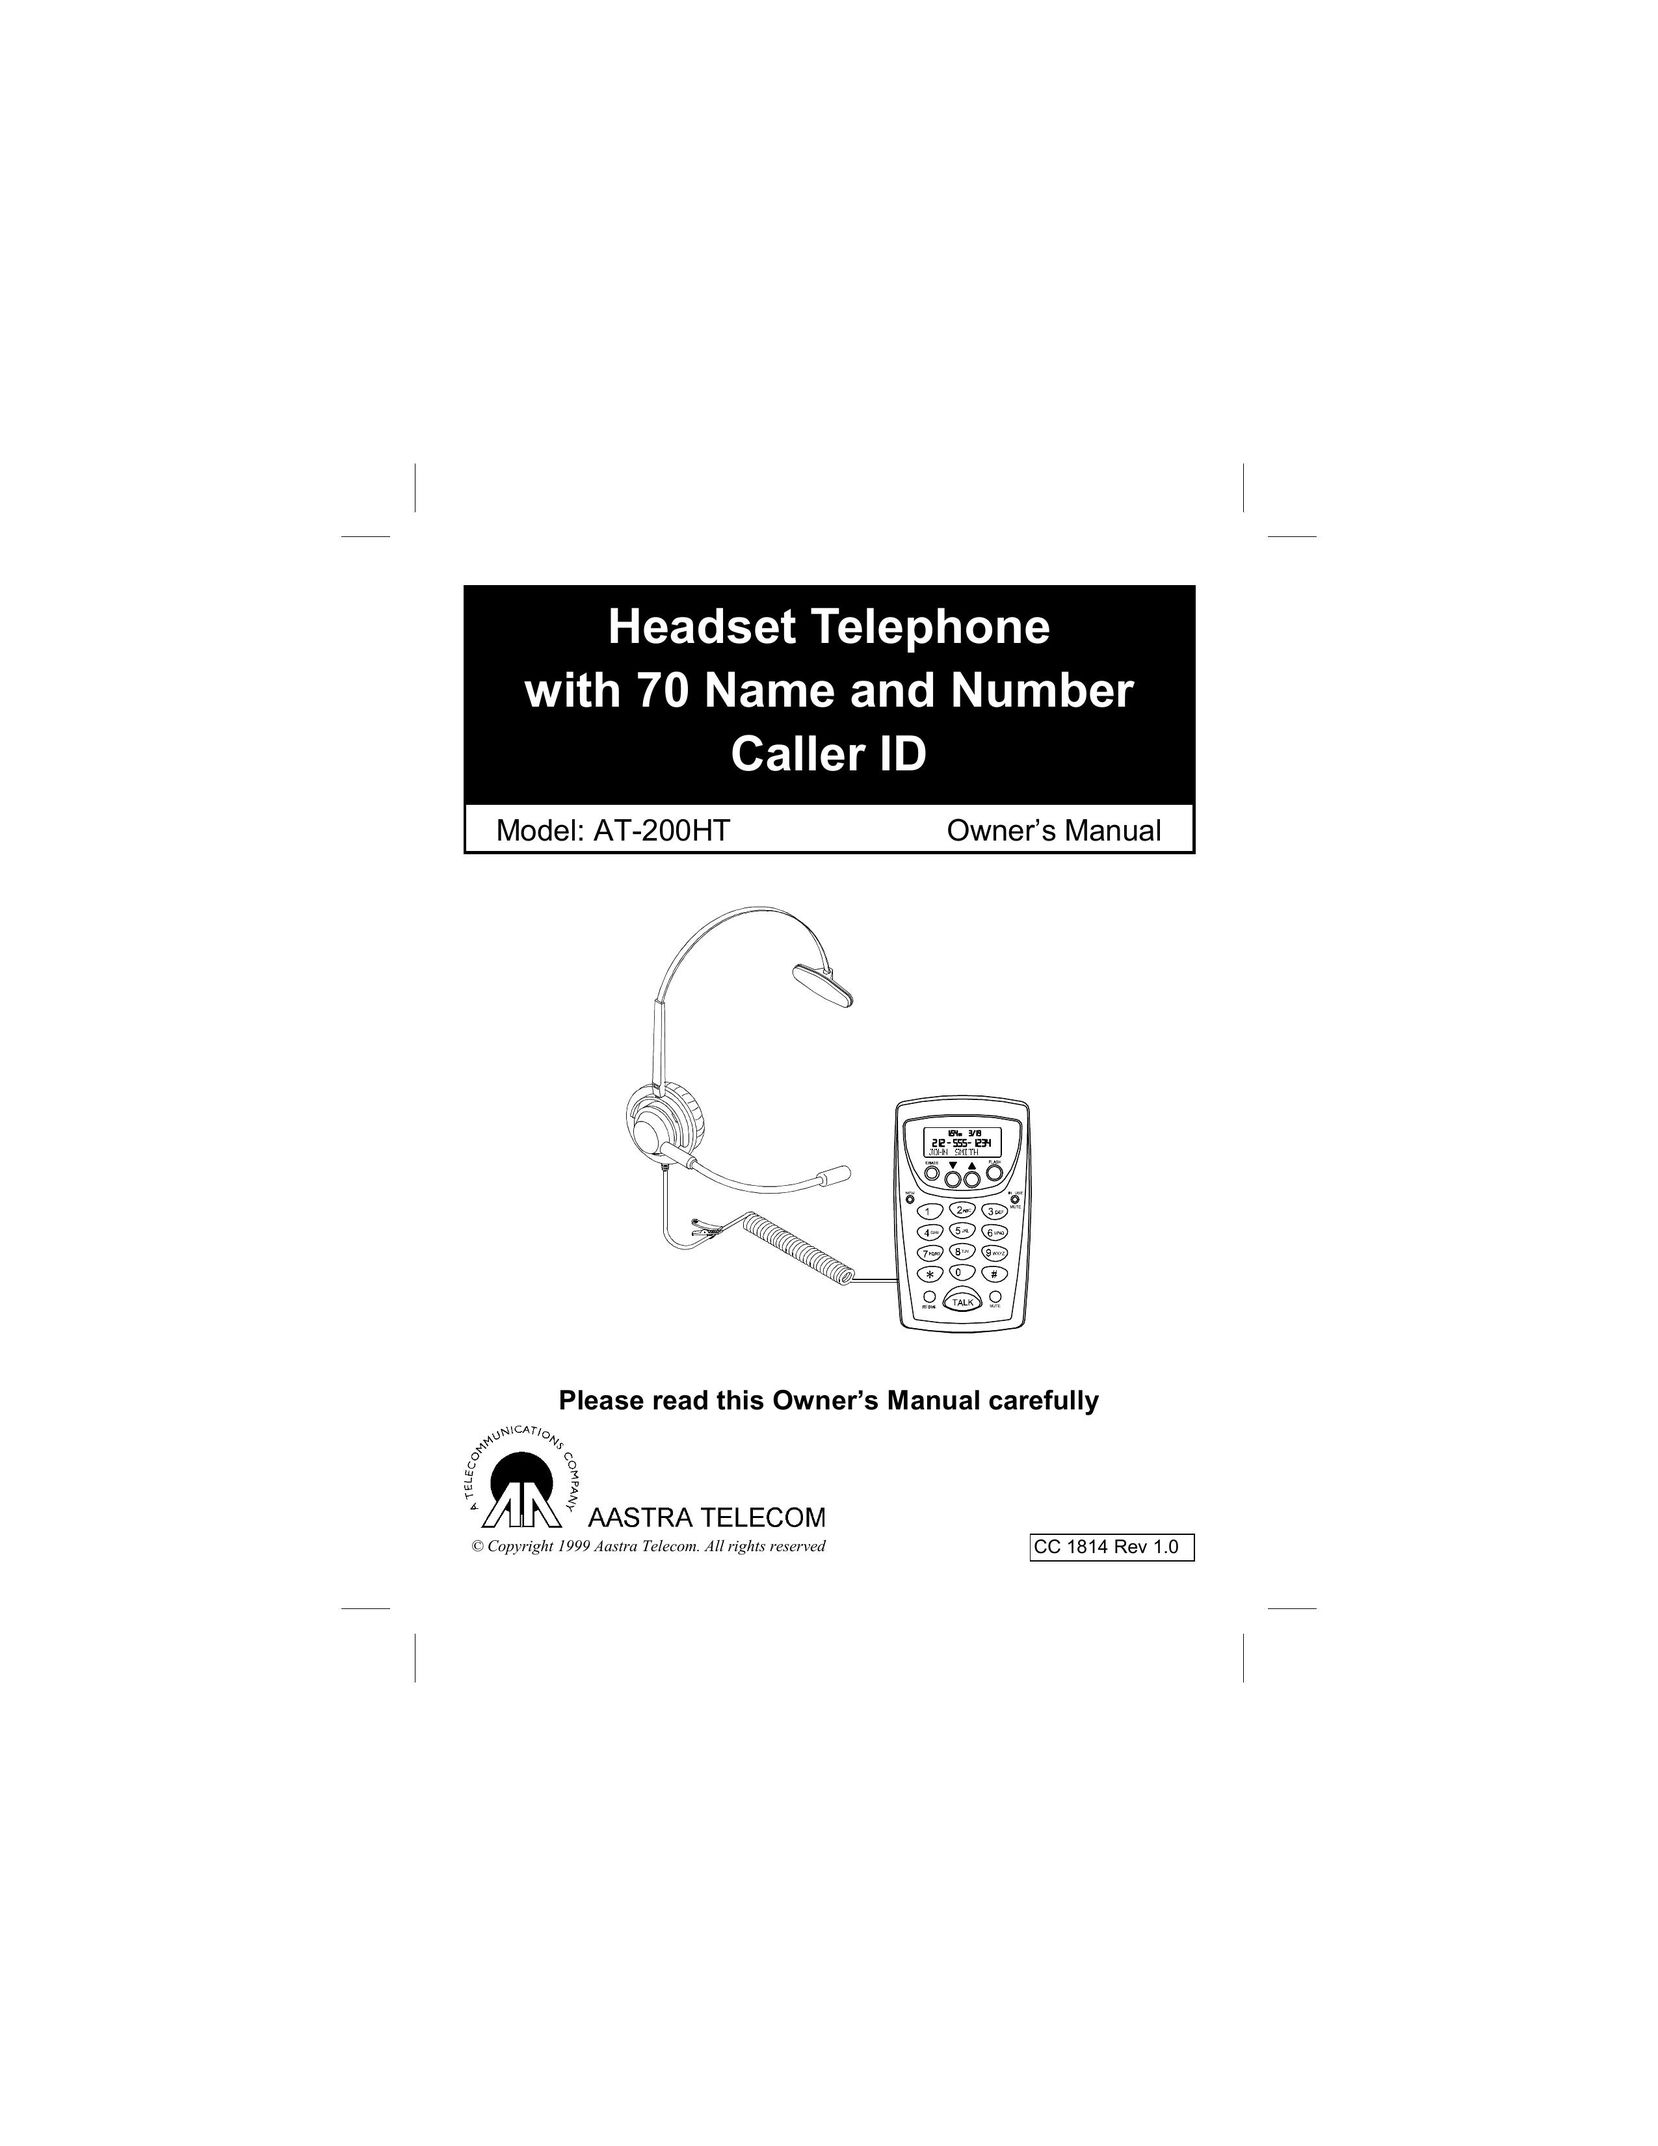 Aastra Telecom AT-200HT Corded Headset User Manual